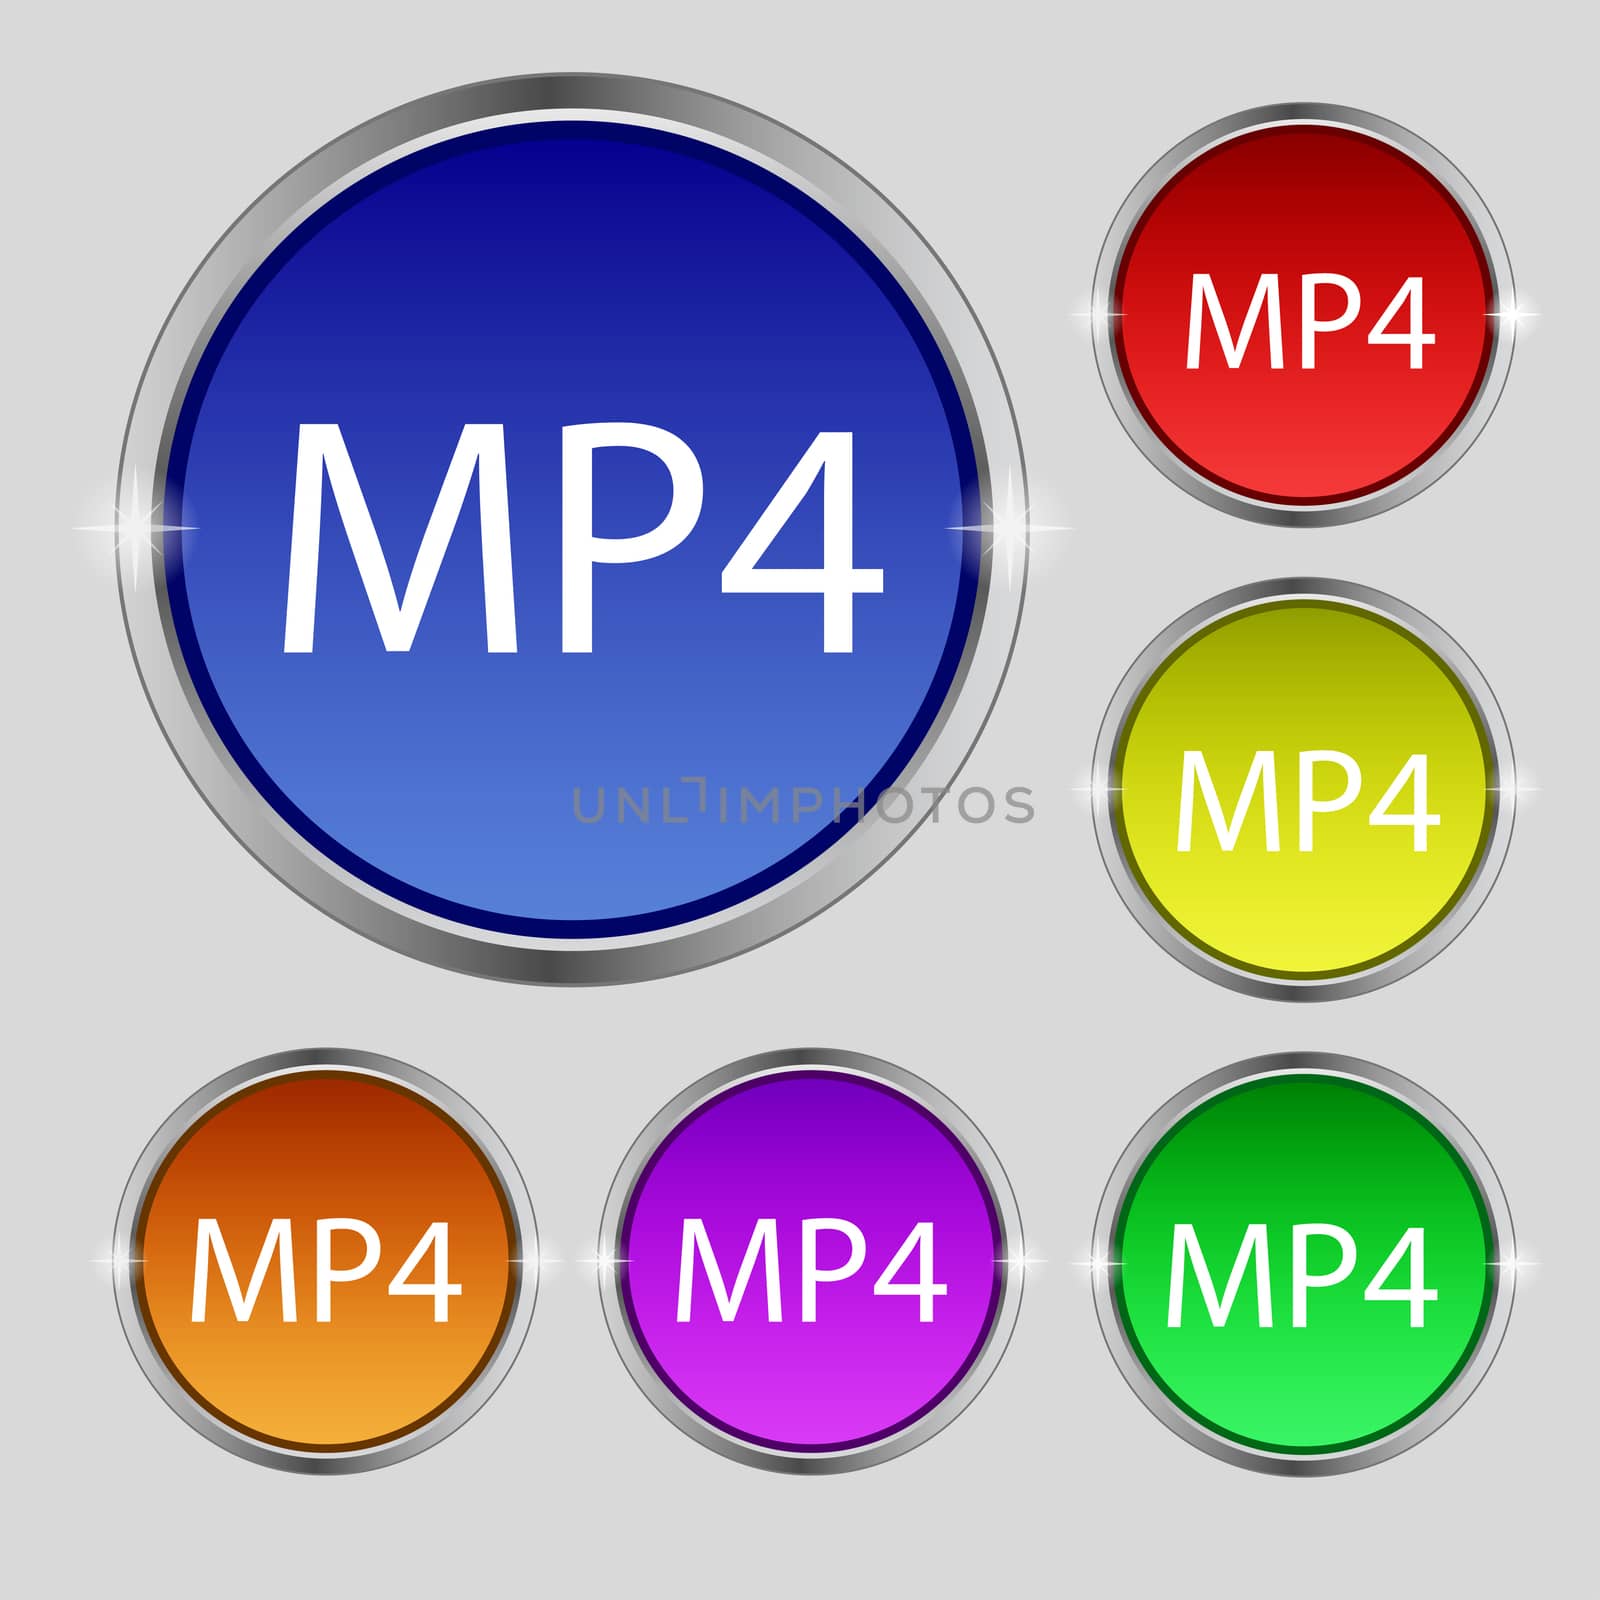 Mpeg4 video format sign icon. symbol. Set of colored buttons. illustration